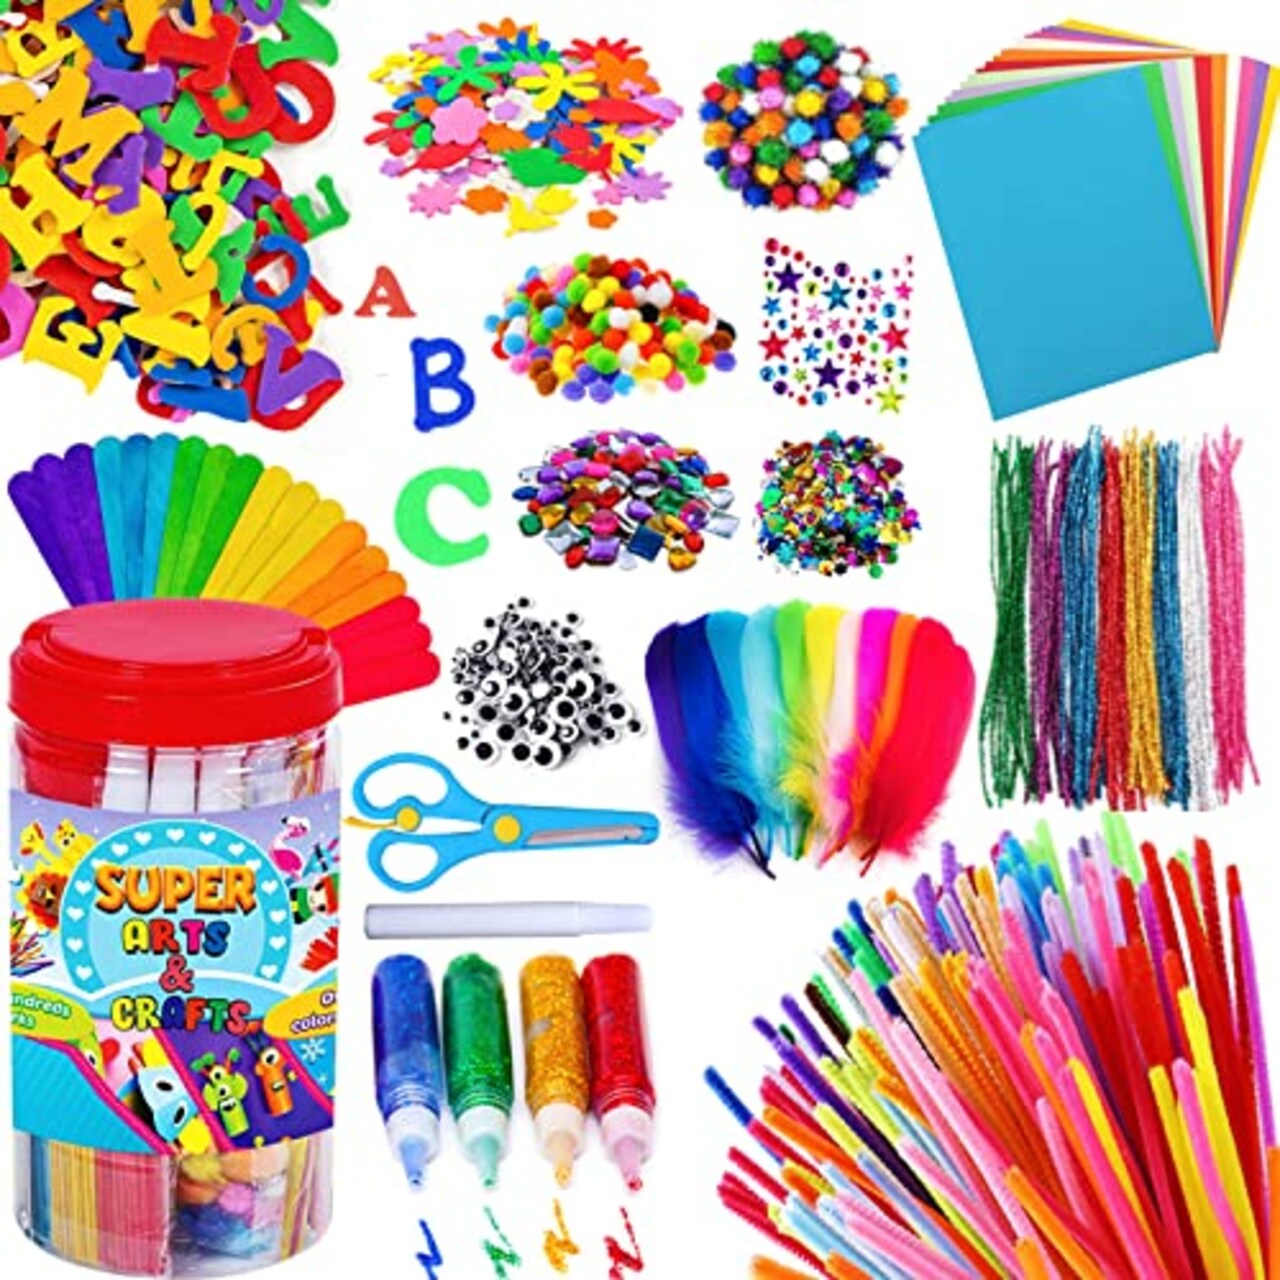 Goody King Arts and Crafts Supplies for Kids - Craft Art Supply Jar Kit for  Student Age 4 5 6 7 8 9 10 Year Old Crafting Activity - Collage Arts Set  for Toddlers Preschool DIY Classroom Home Project